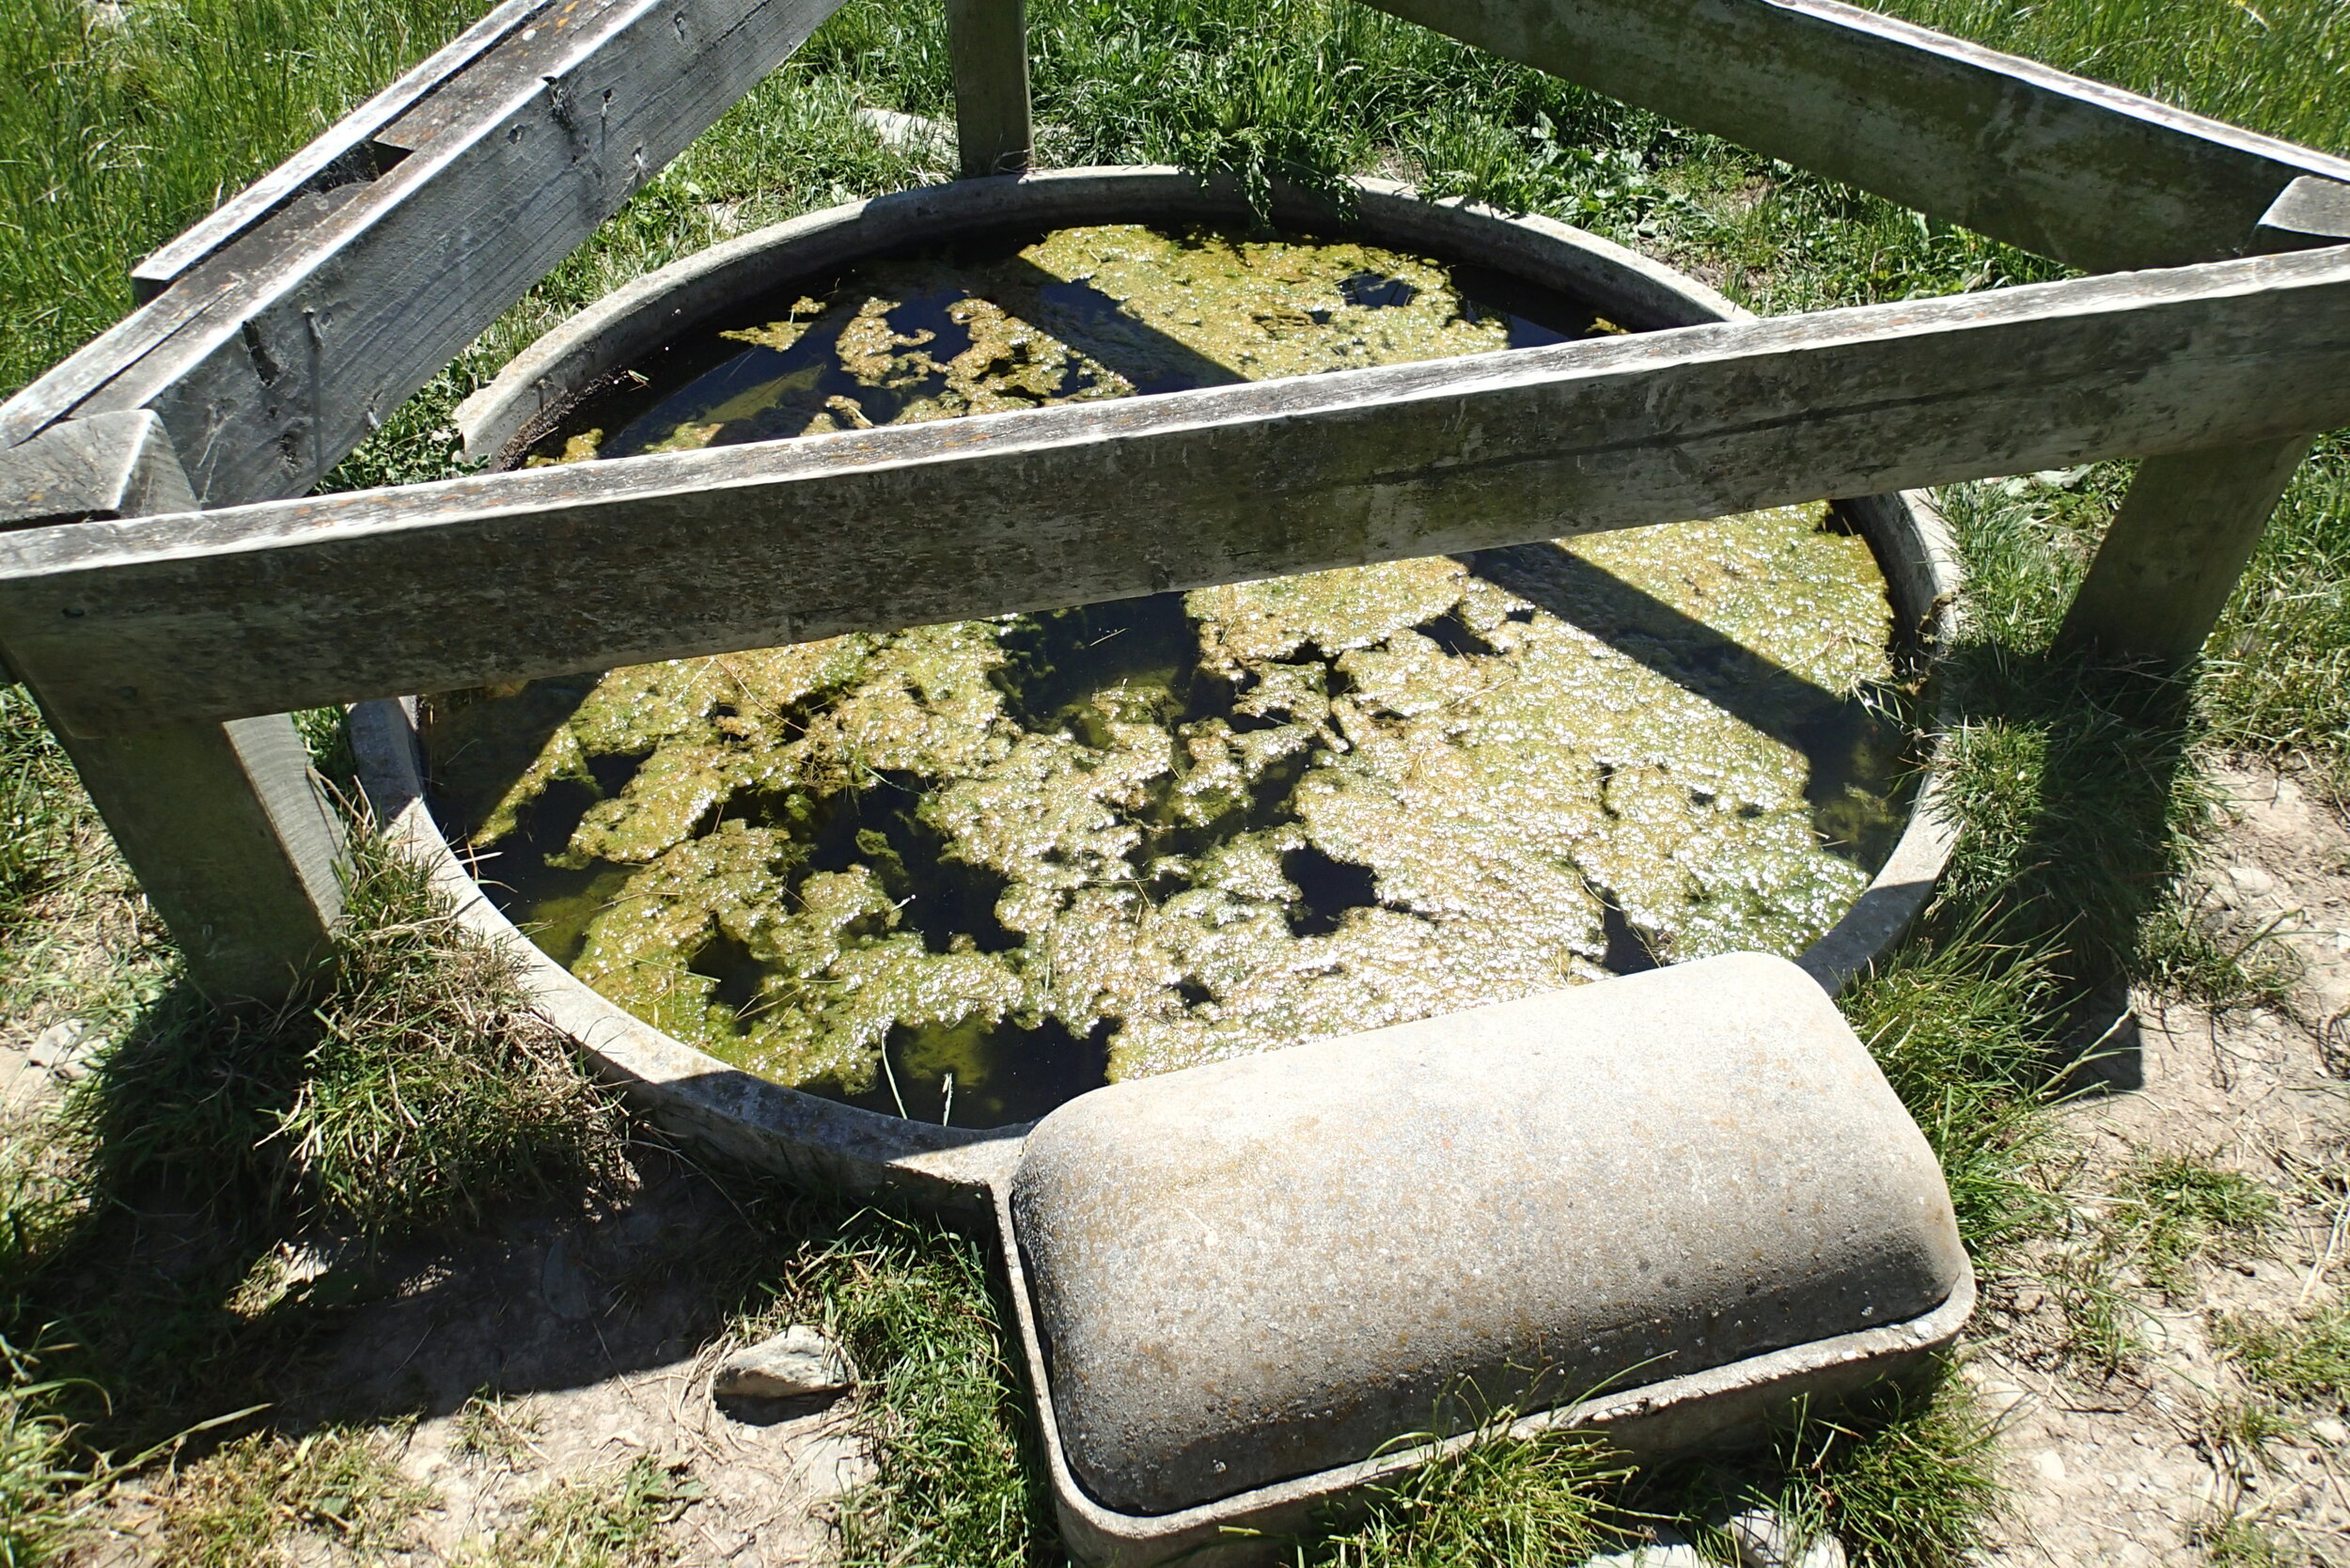 floating algae makes drinking difficult in this dirty trough 